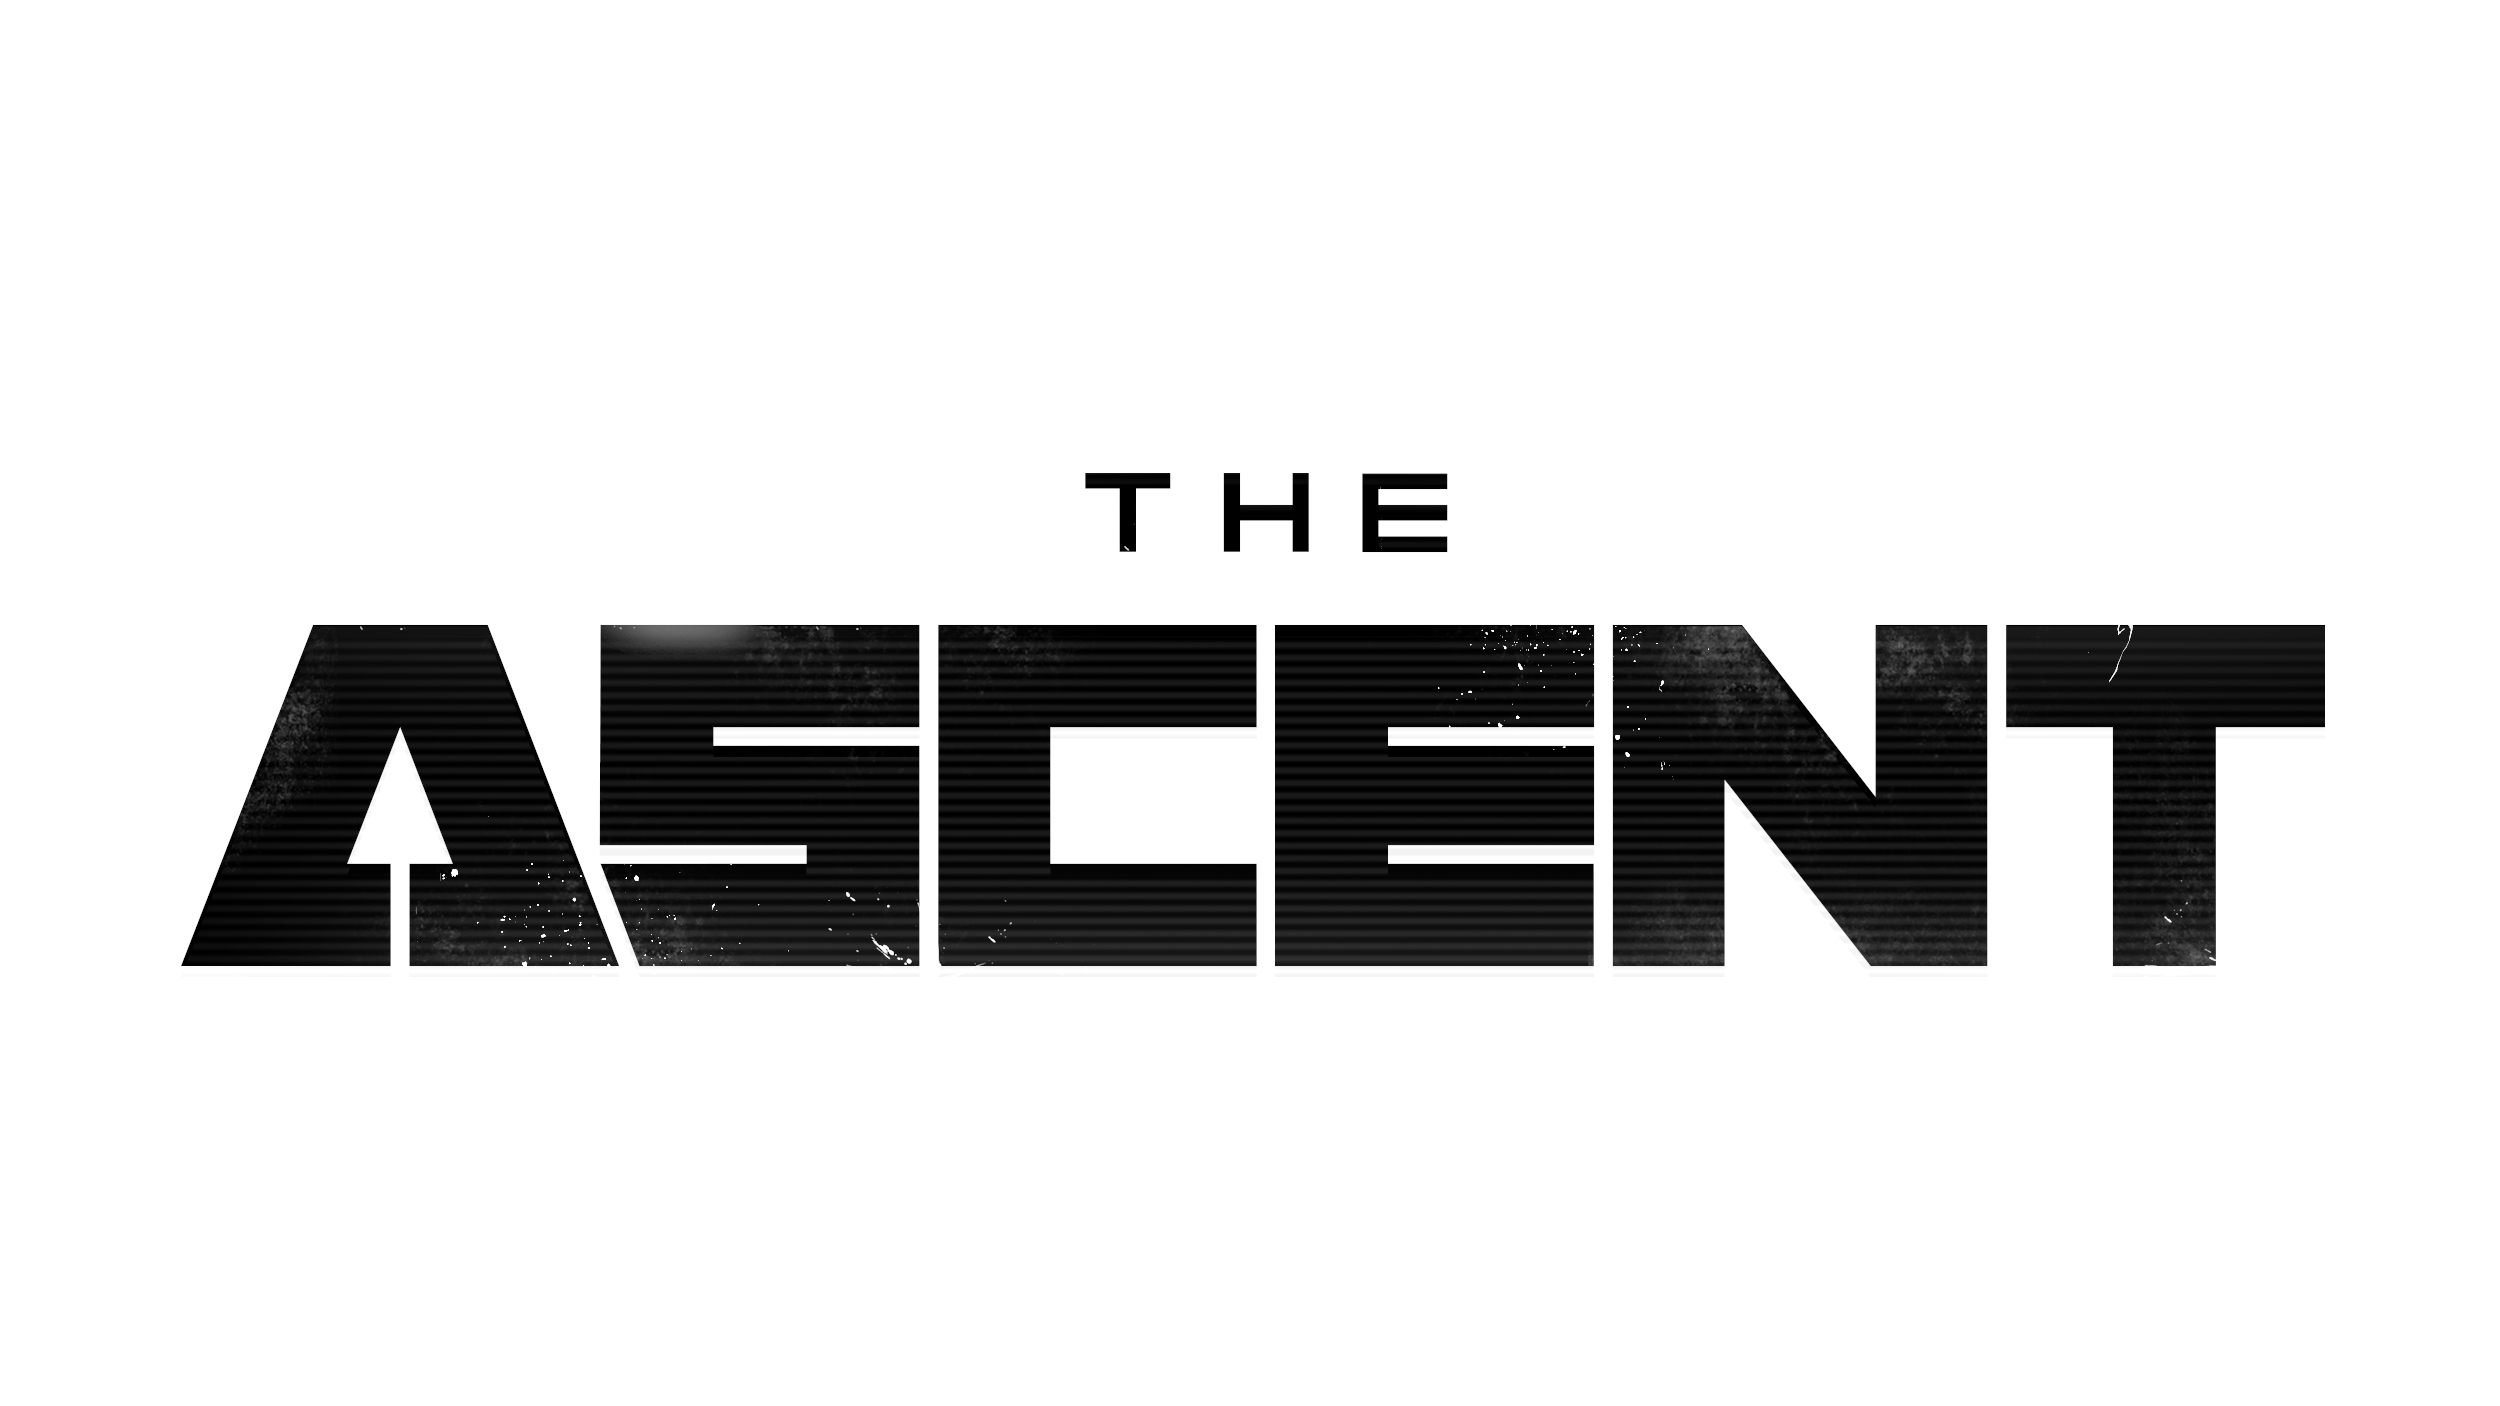 video game, the ascent